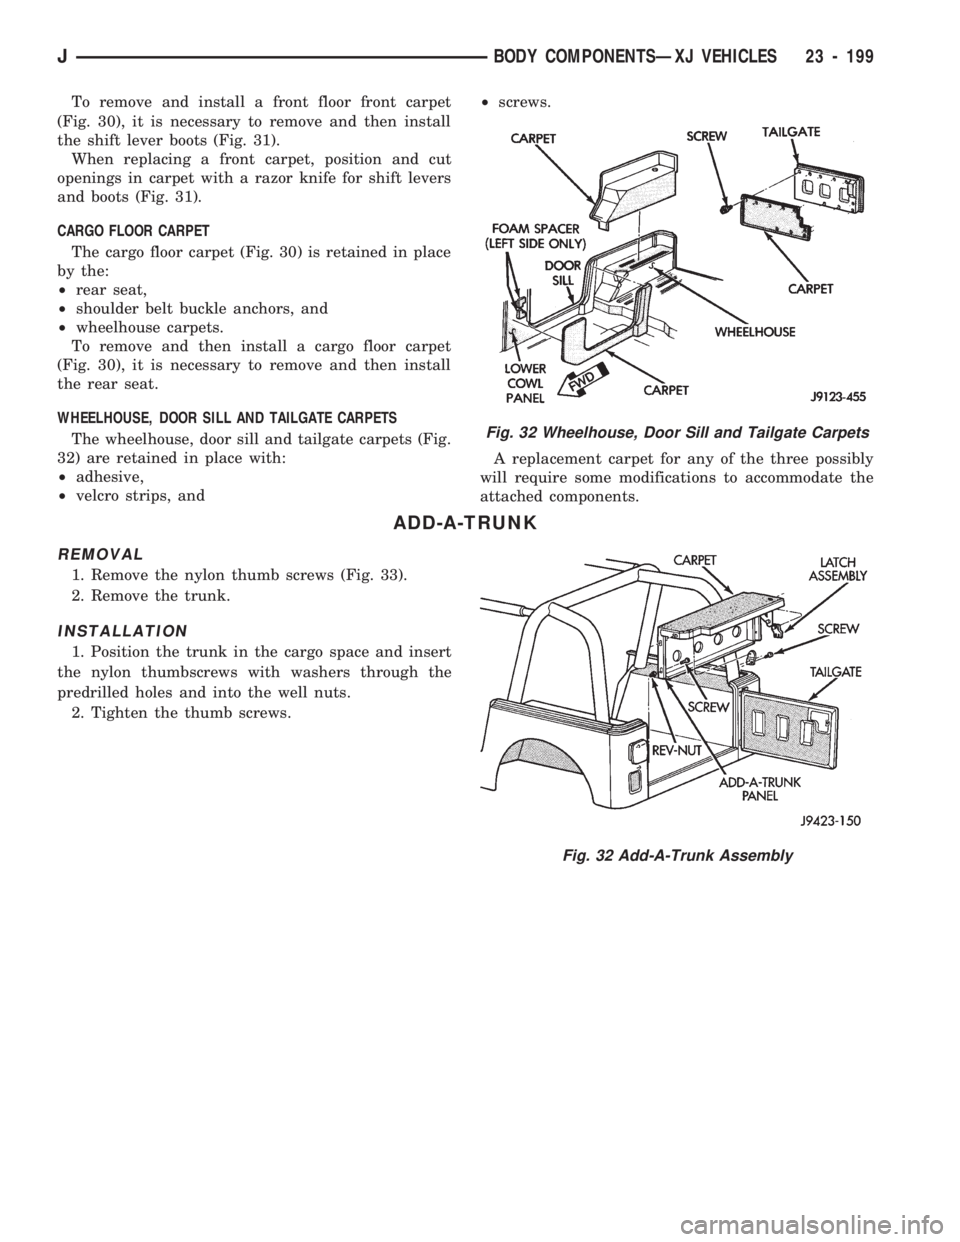 JEEP WRANGLER 1994  Owners Manual Fig. 32 Add-A-Trunk Assembly
JBODY COMPONENTSÐXJ VEHICLES 23 - 199 